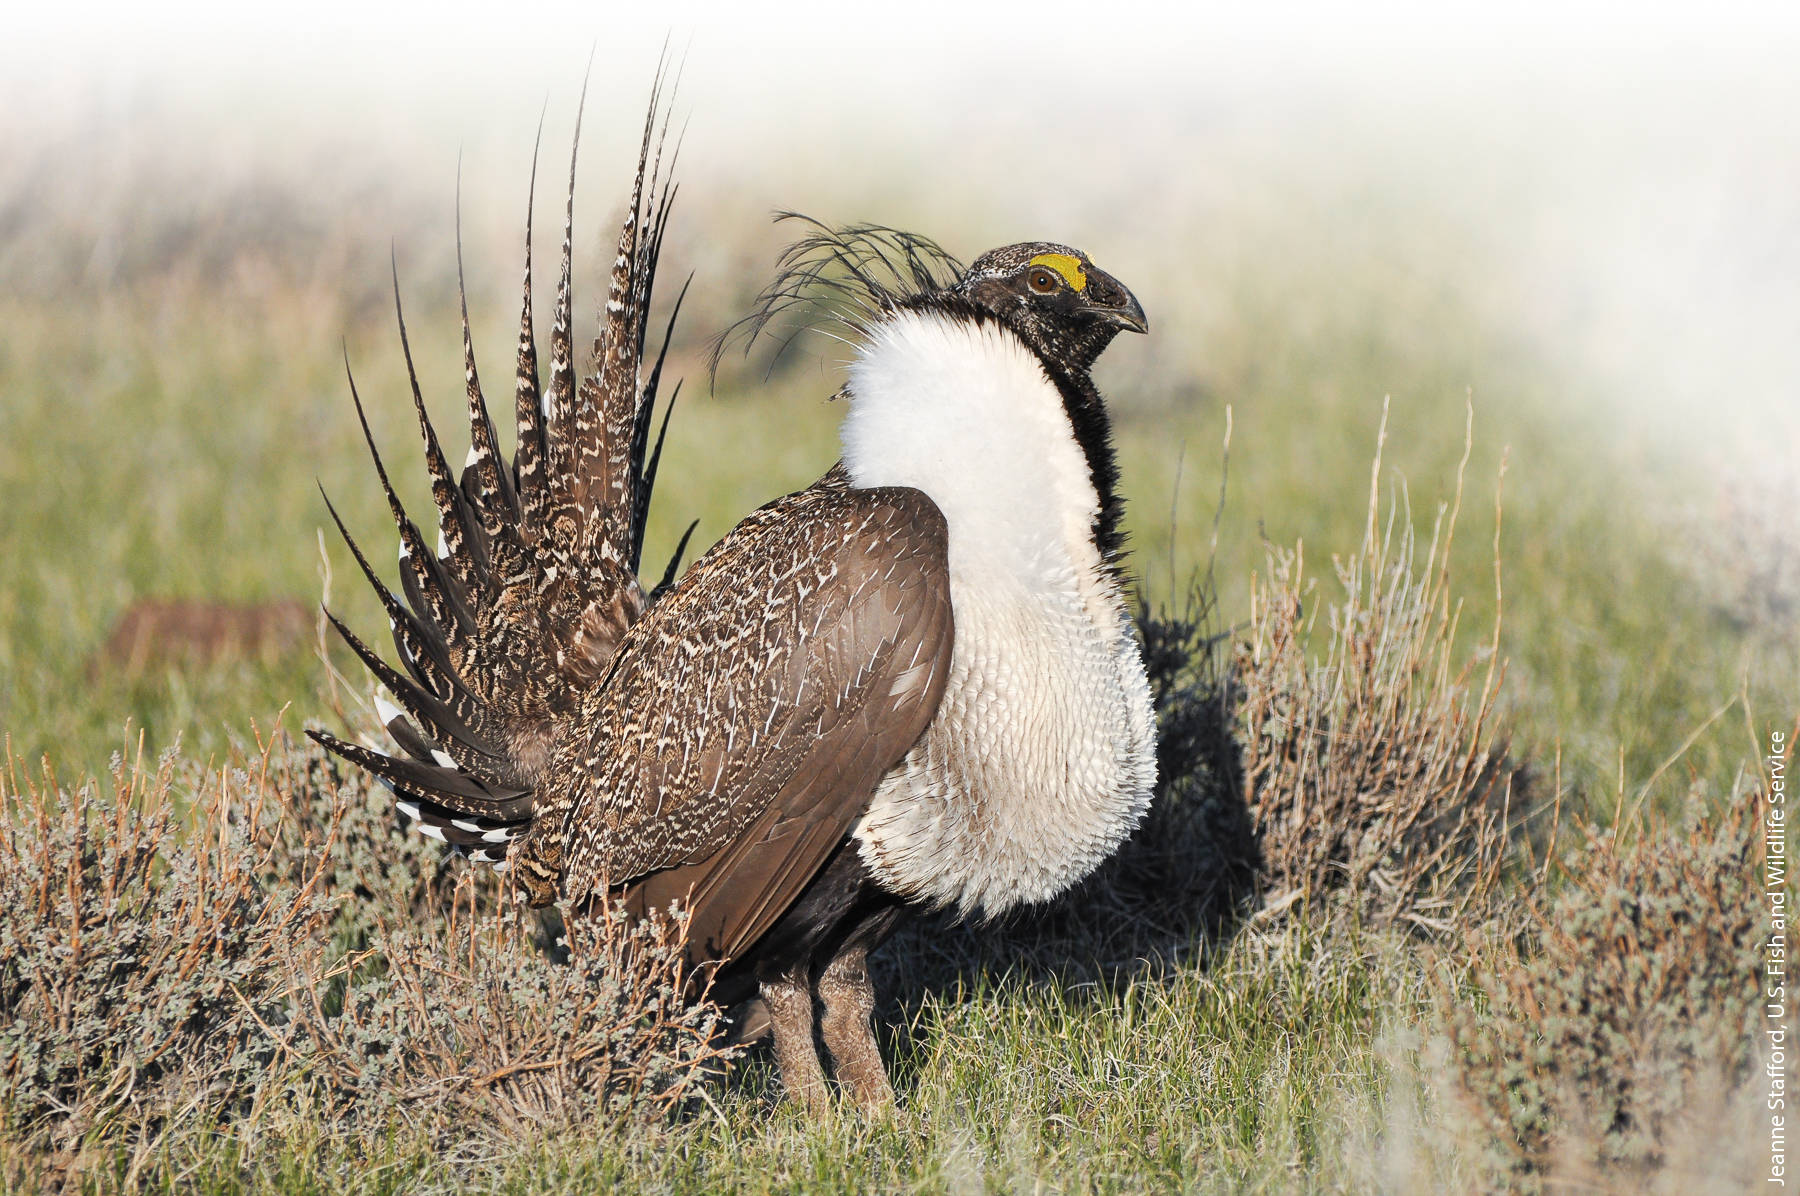 A male sage grouse (Centrocercus urophasianus) struts for a female at a lek, an open area where males perform courtship displays. At Clear Lake National Wildlife Refuge, the number of leks has declined over the past 30 years from 40 active leks to 1 lek.